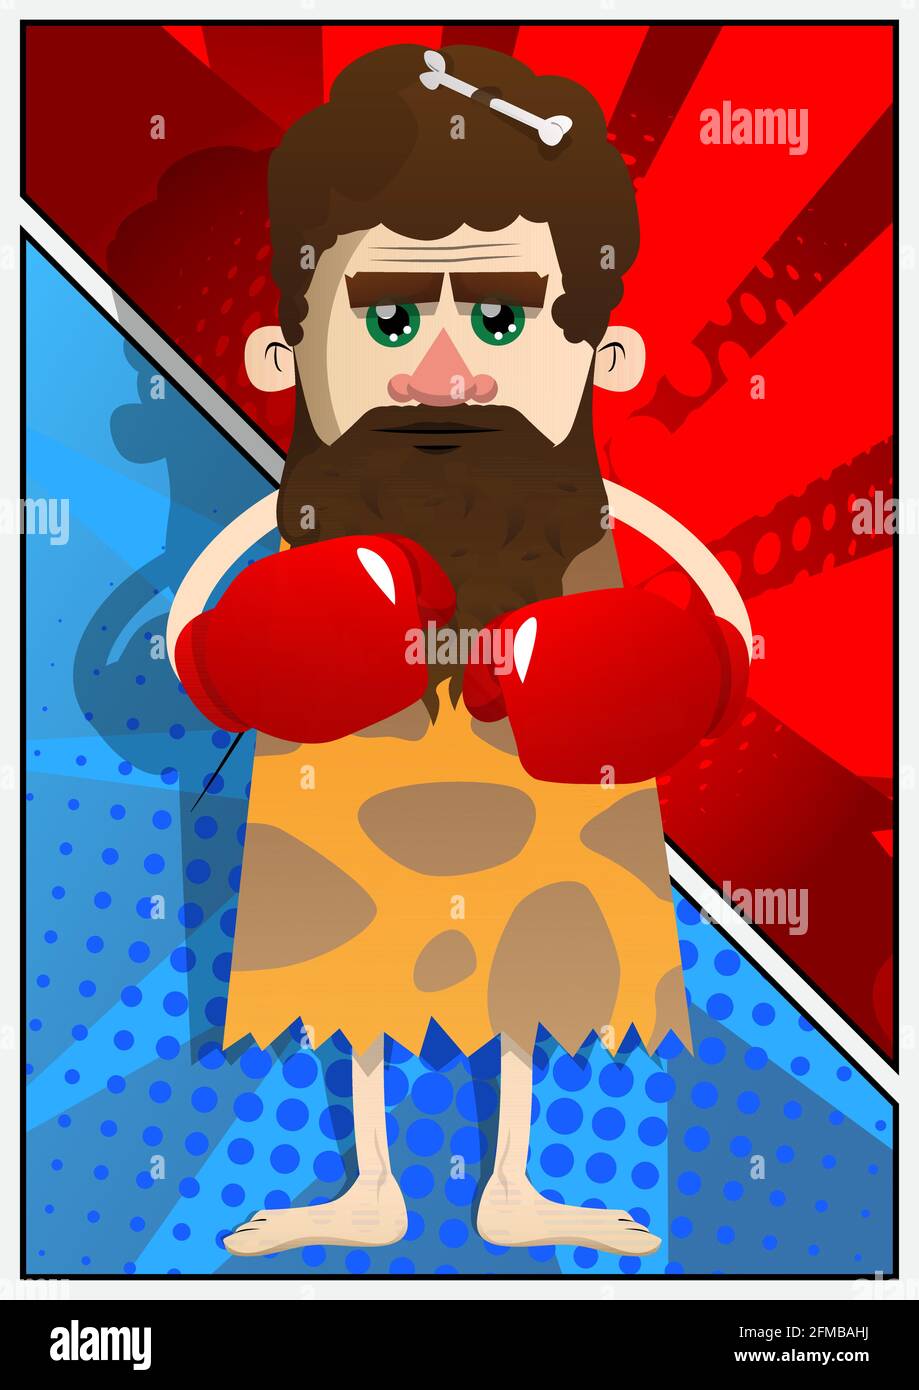 Cartoon prehistoric man holding his fists in front of him ready to fight wearing boxing gloves. Vector illustration of a man from the stone age. Stock Vector